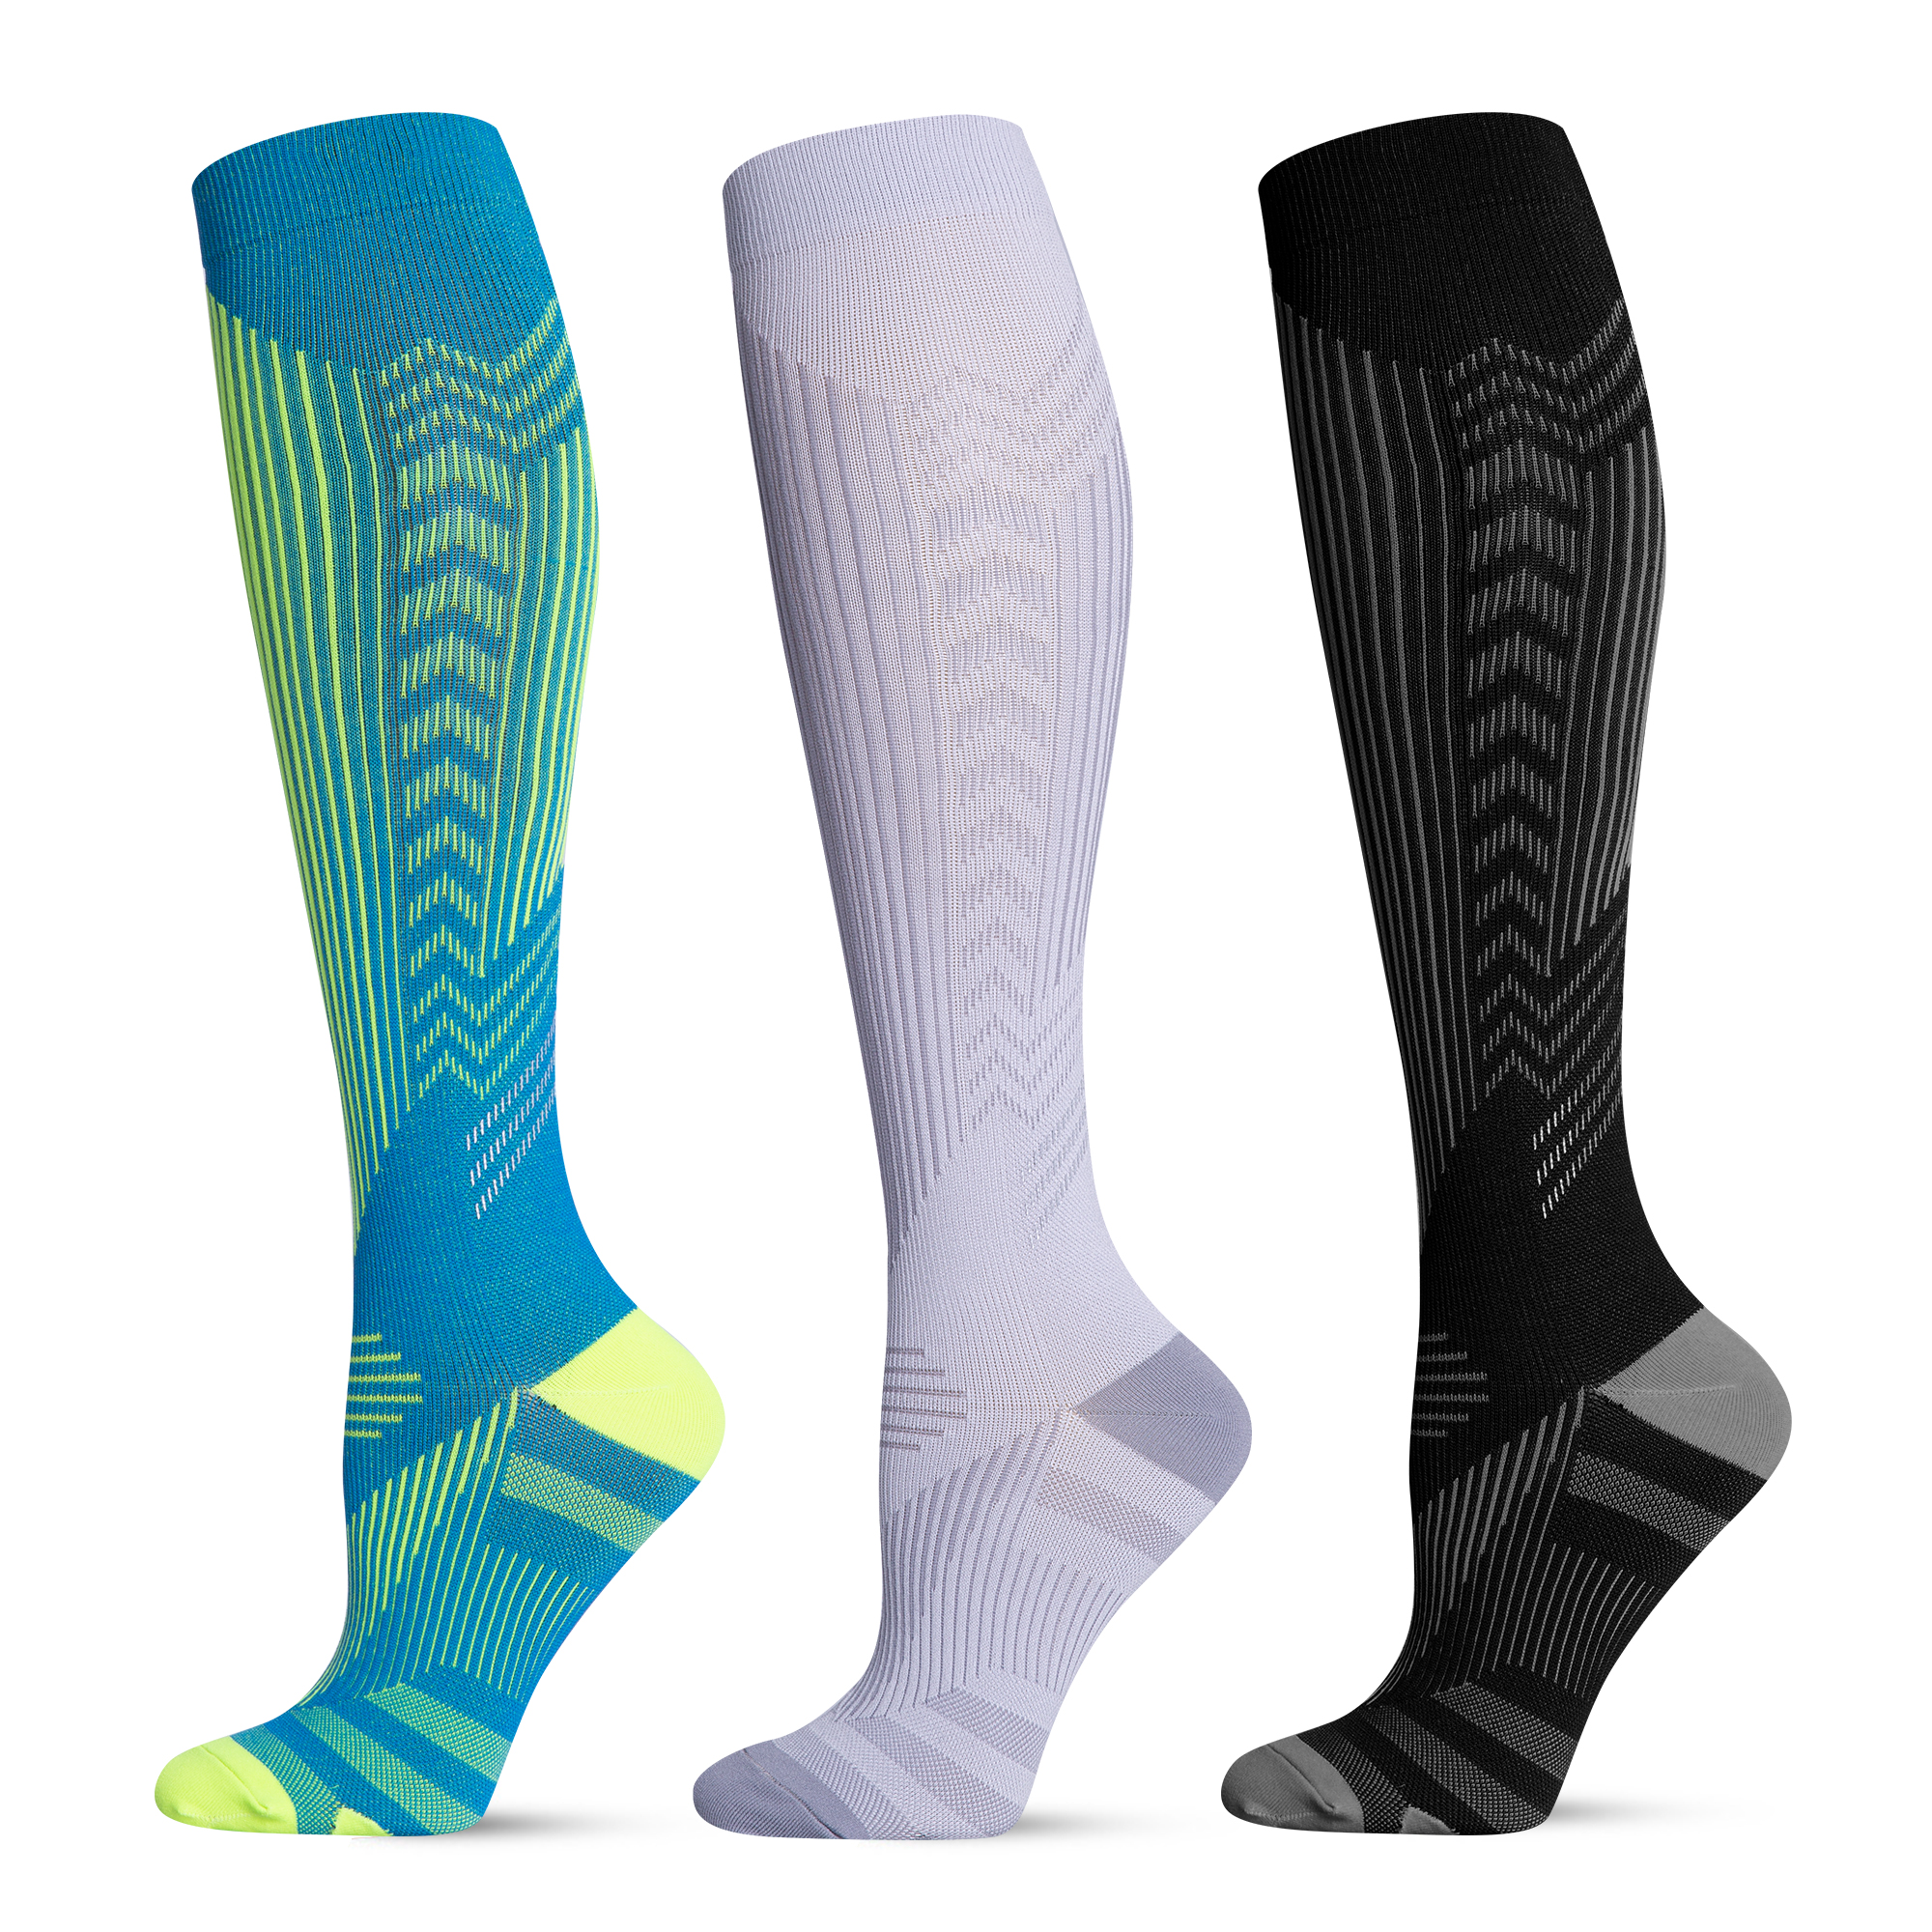 OEM Factory for Pocket Socks - Compression Socks 360-degree Stretch for Greater Flexibility and Durability Women & Men Circulation – Best for Medical, Running, Athletic Pressure Socks &#...